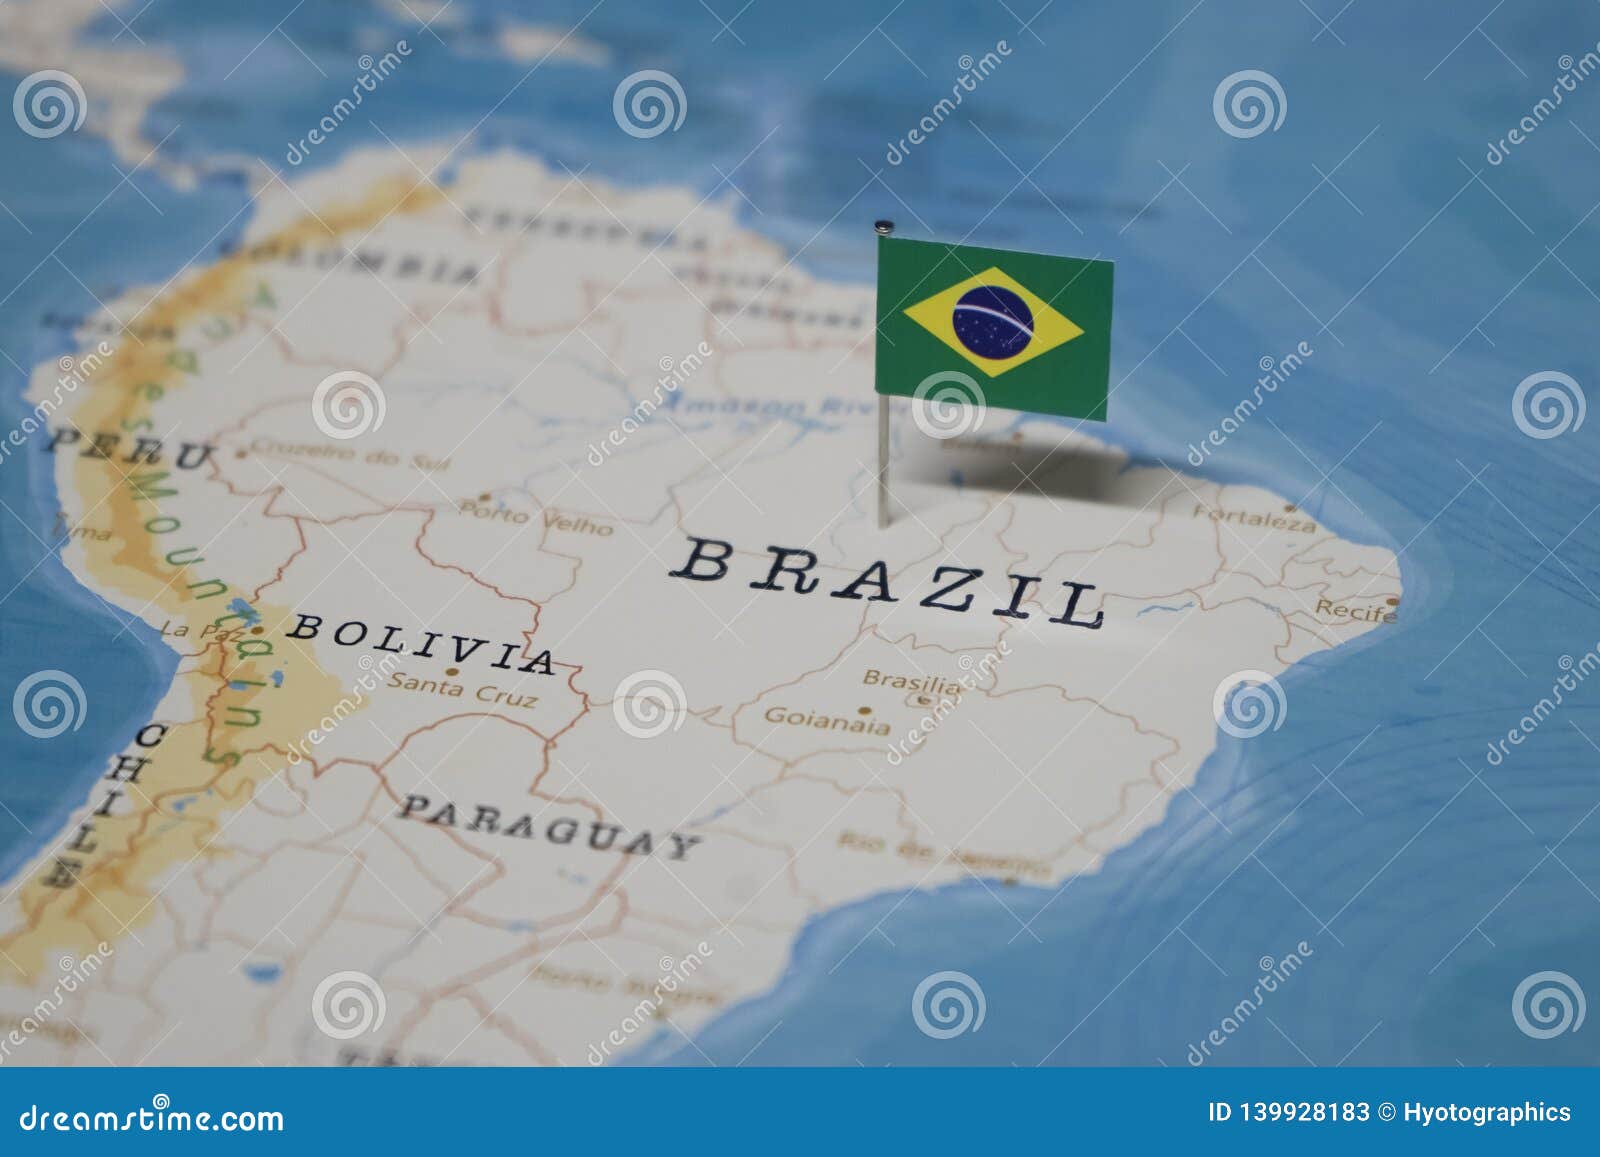 the flag of brazil in the world map